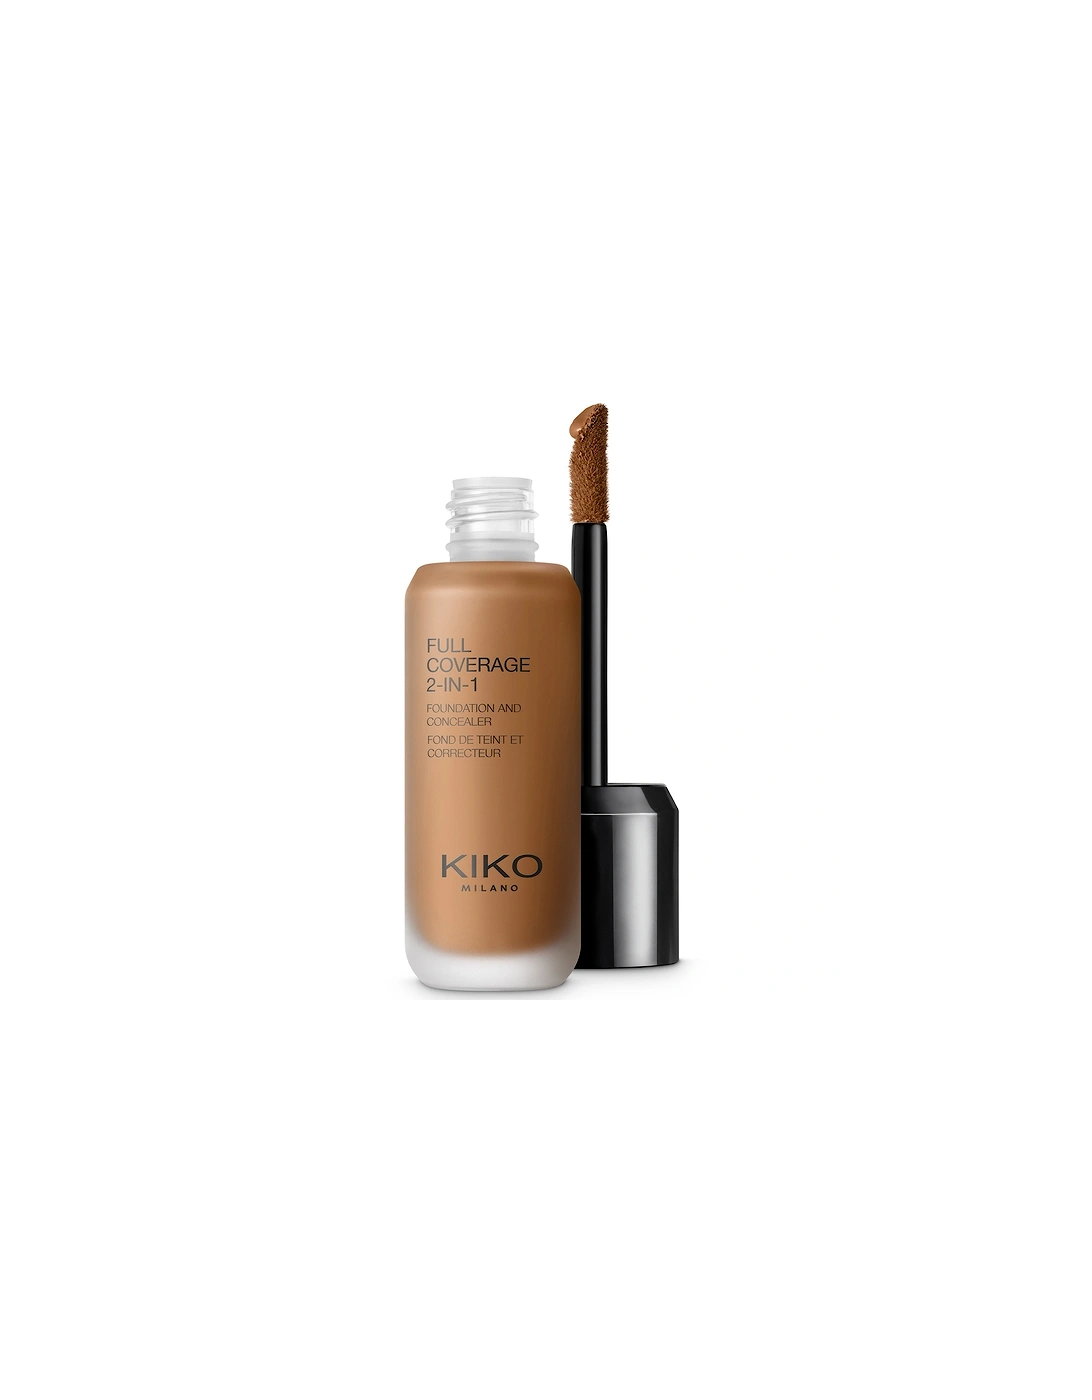 Full Coverage 2-in-1 Foundation and Concealer - 110 Neutral, 2 of 1